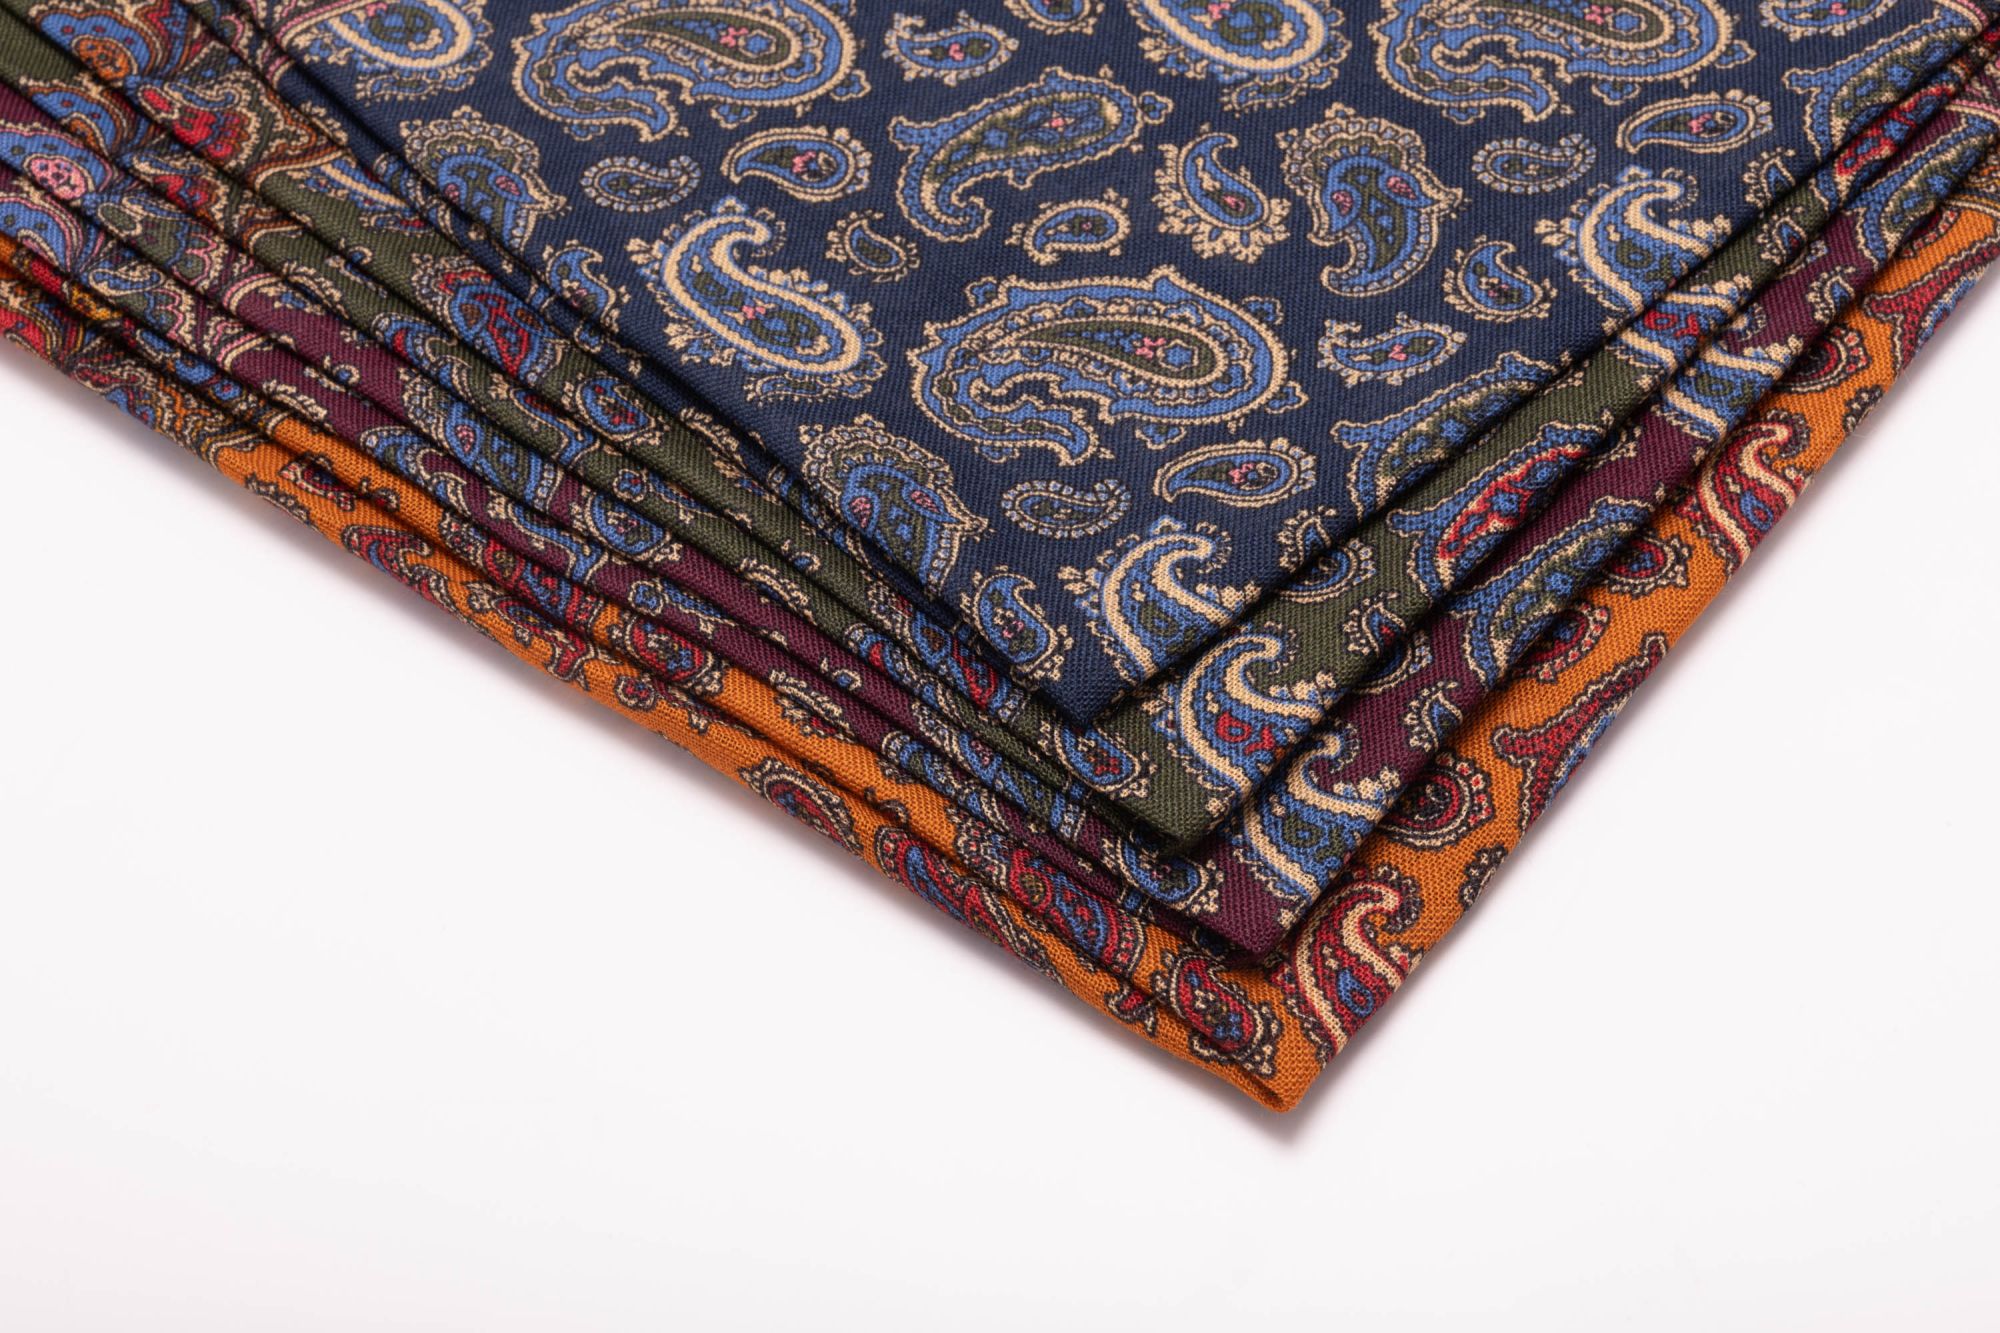 Dean Men's Pocket Square in Classic Blue Paisley and Burgundy Design 